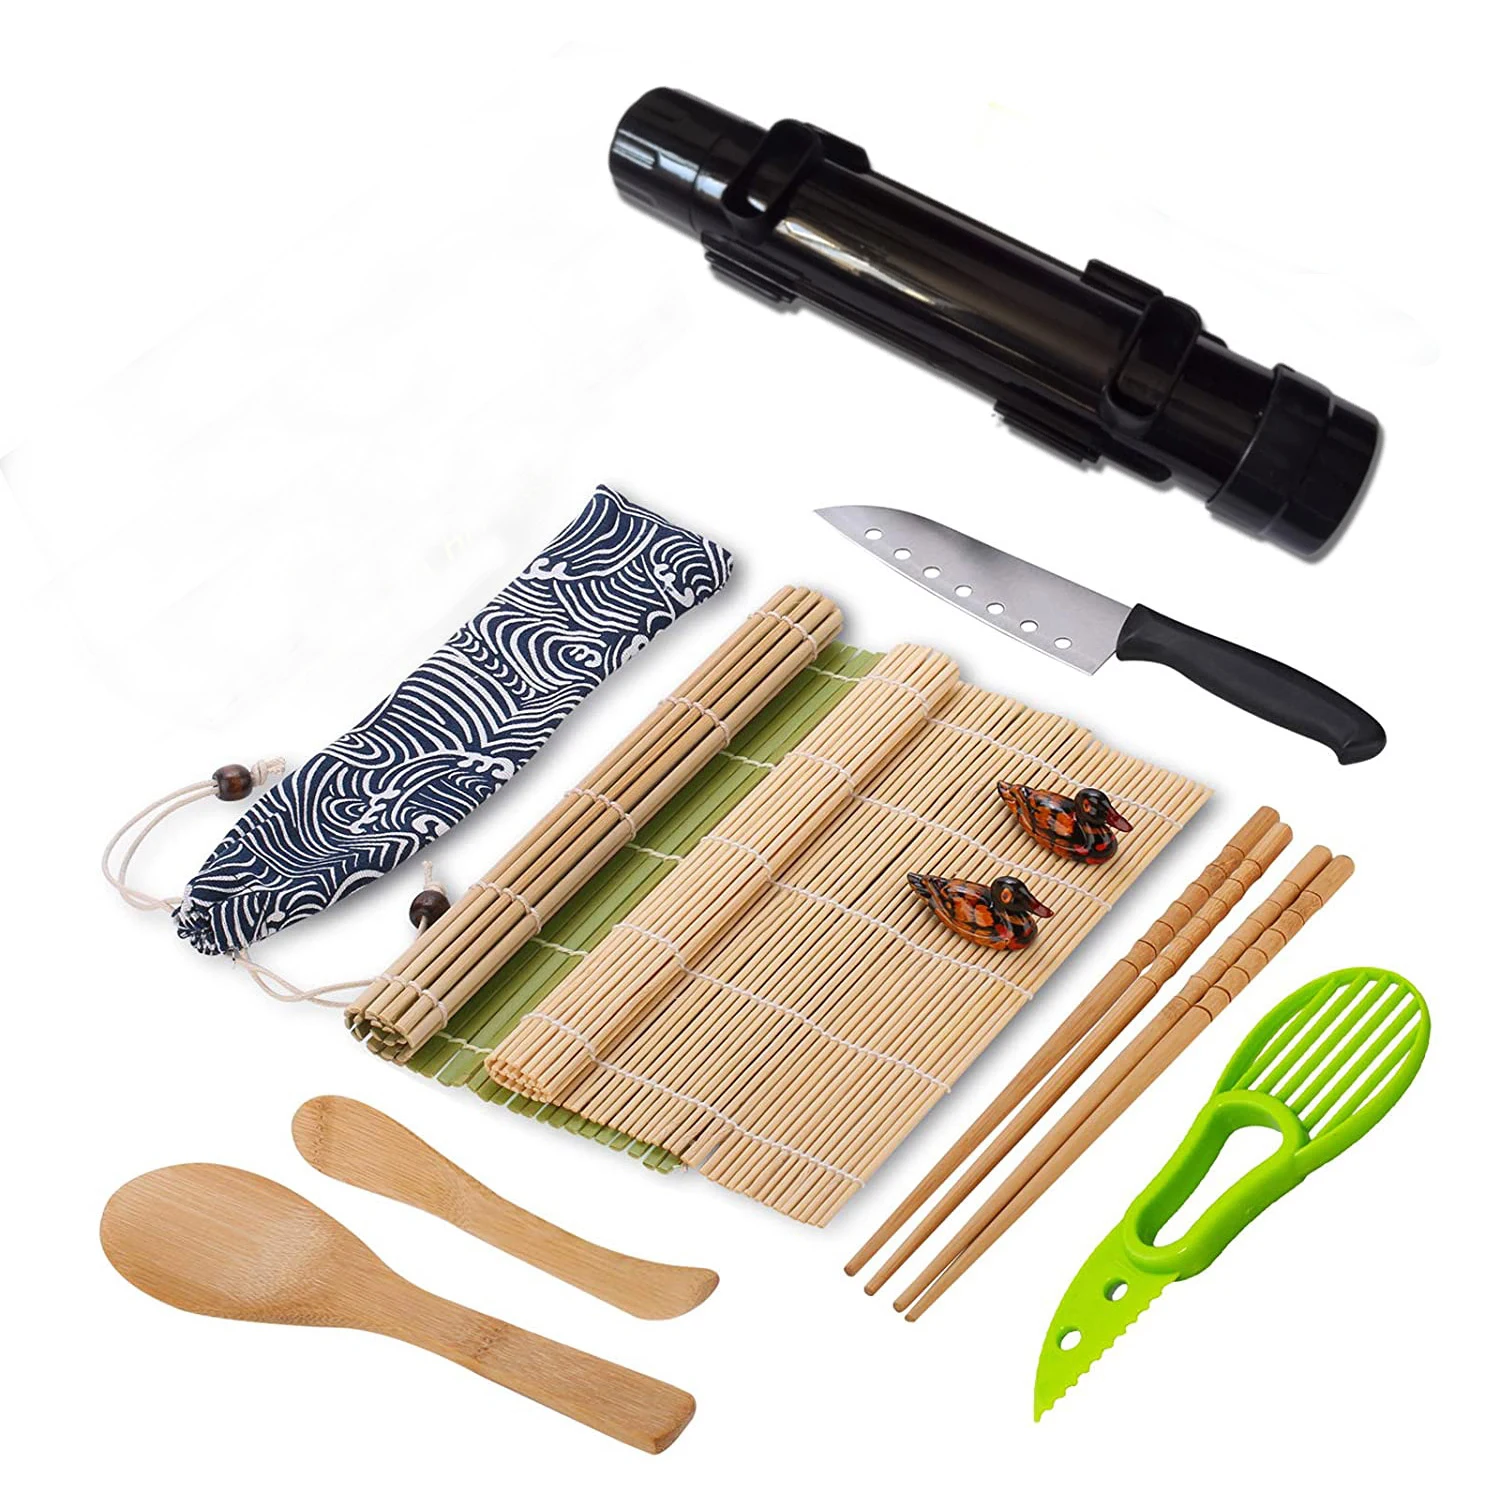 

12pcs Kitchen Set Equipment Beginners Easy Use Home Bamboo Roll Mat Rice Seaweed All One Wood Sushi Making Kit with Bazooka, White, black